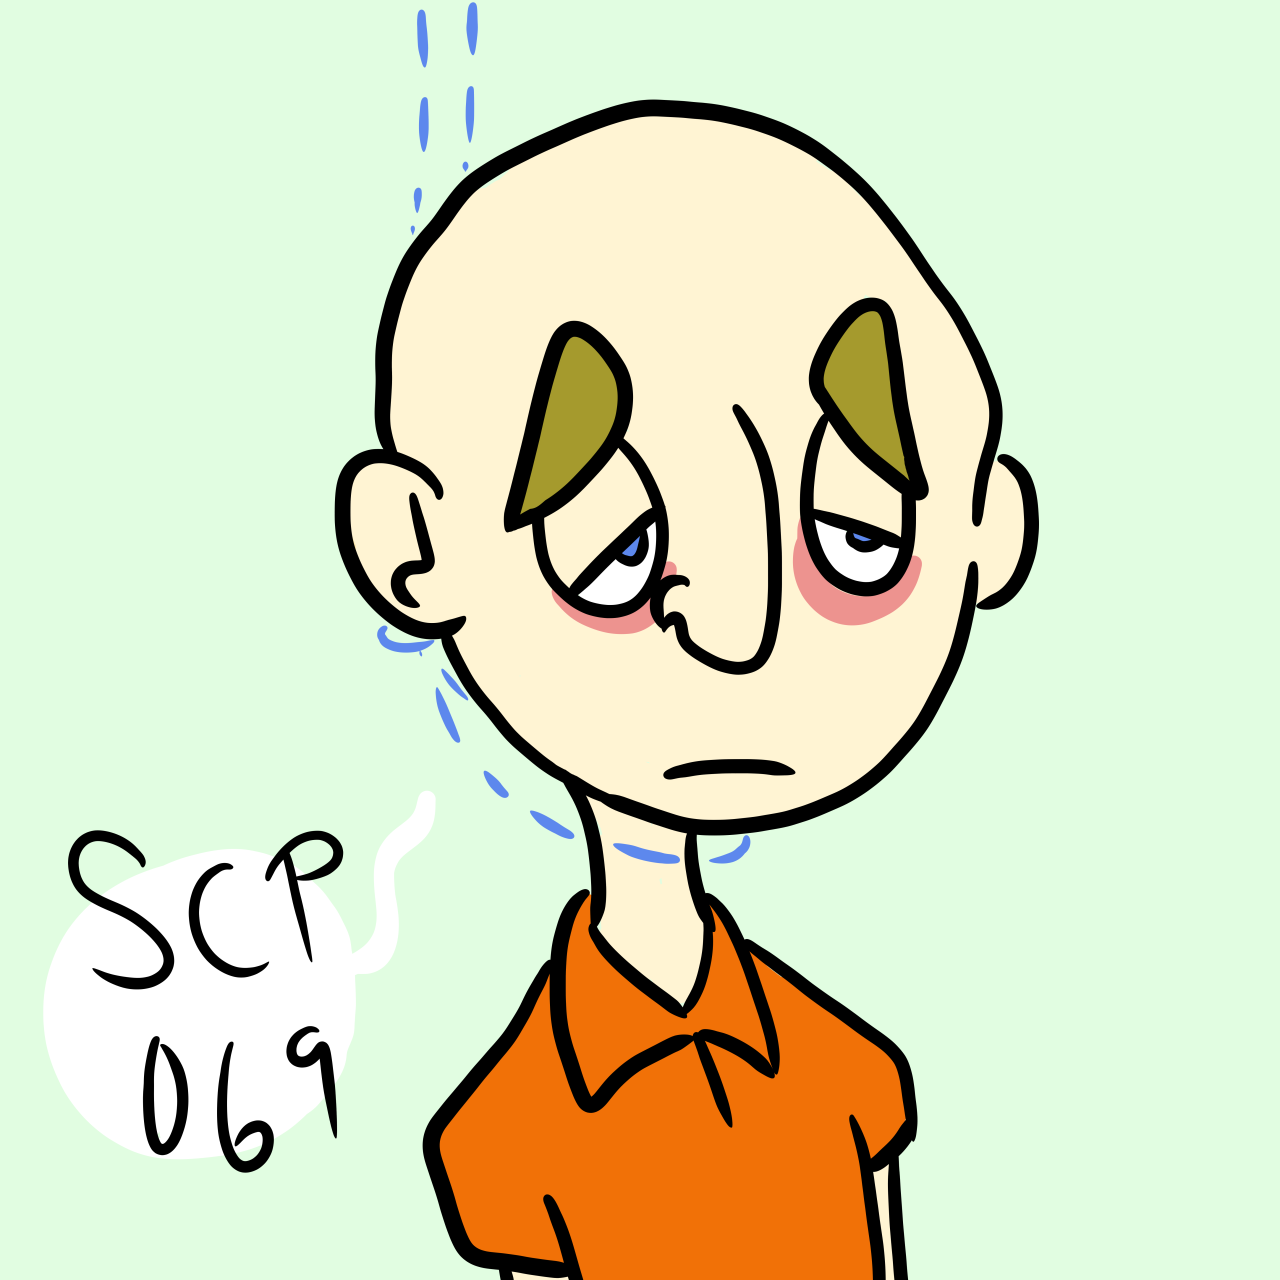 Scp-069